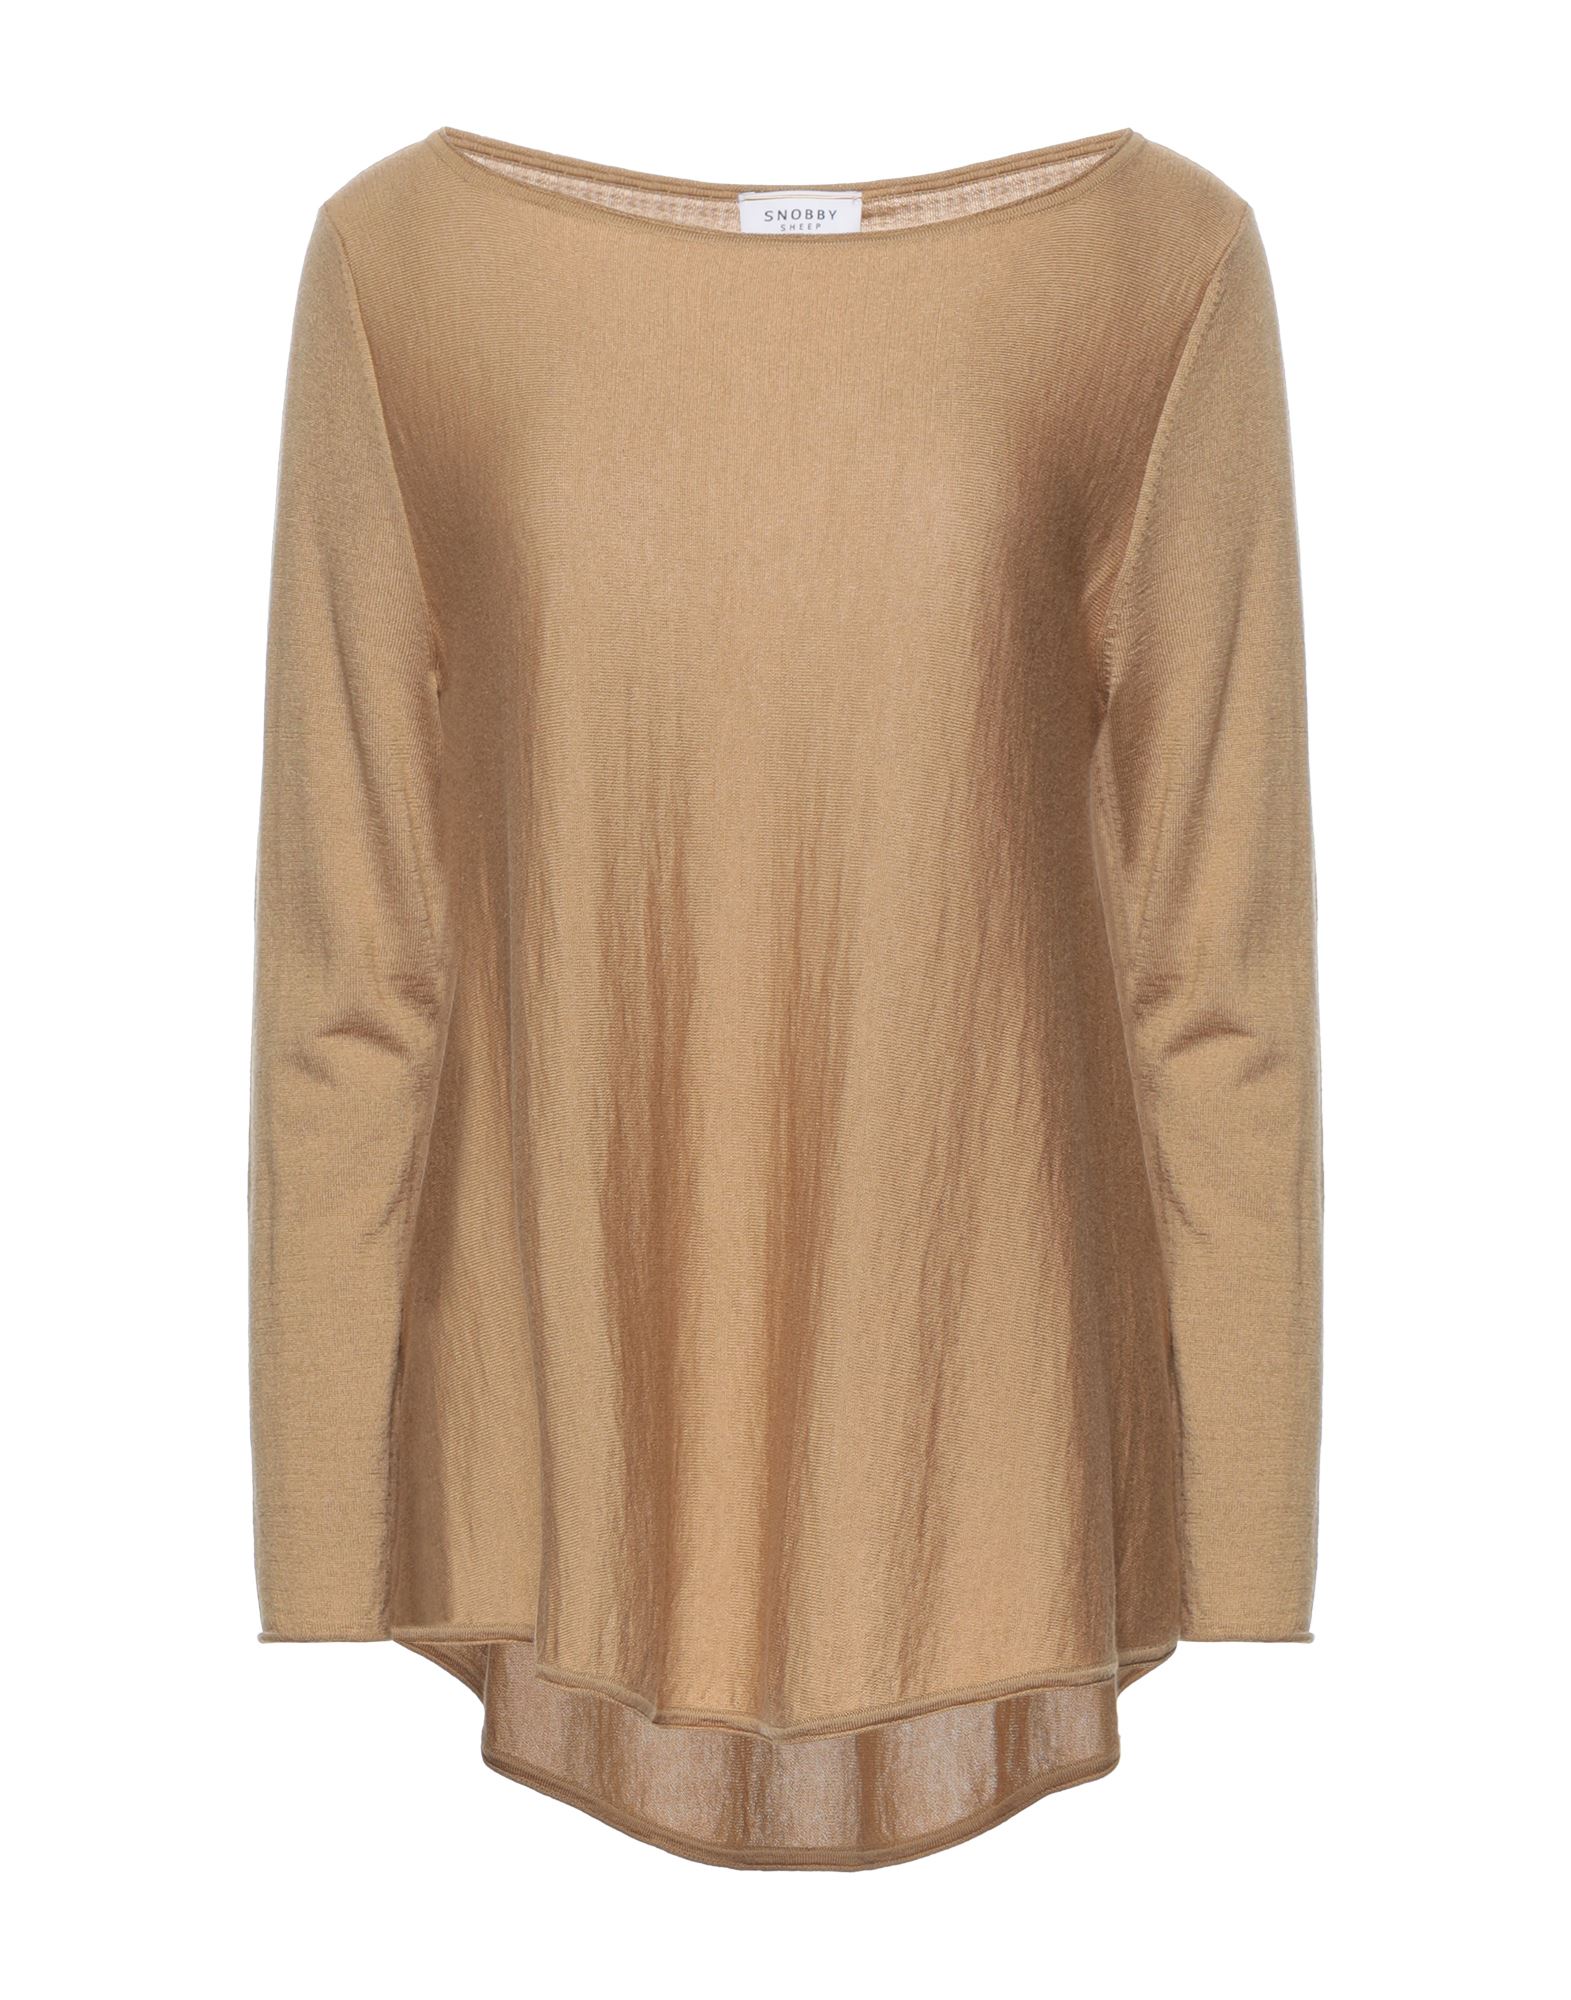 Snobby Sheep Sweaters In Beige